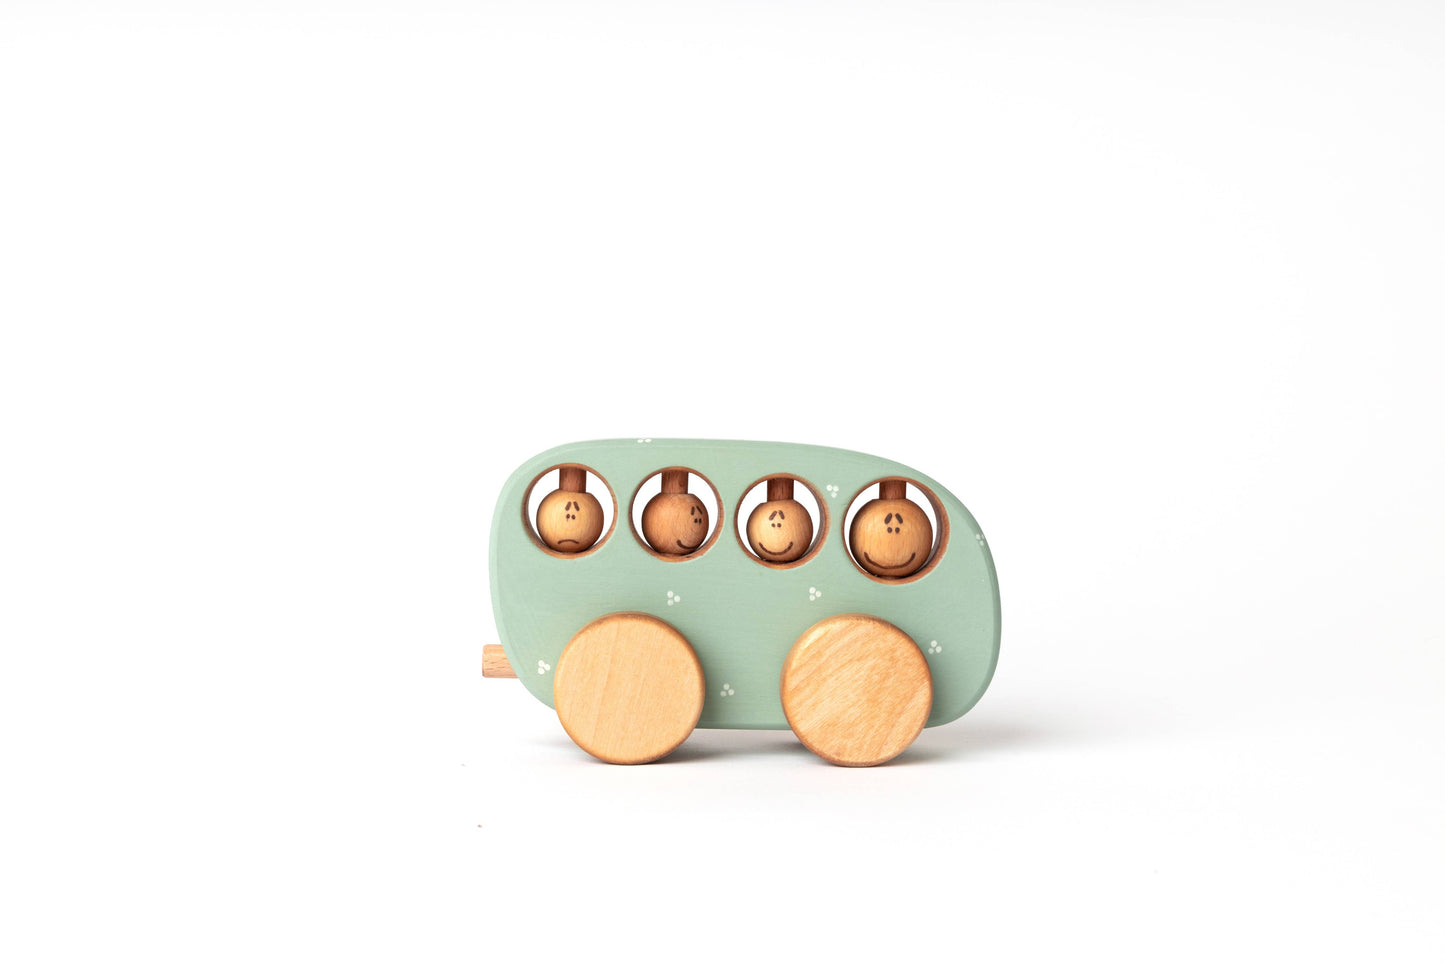 Wooden Bus Toy